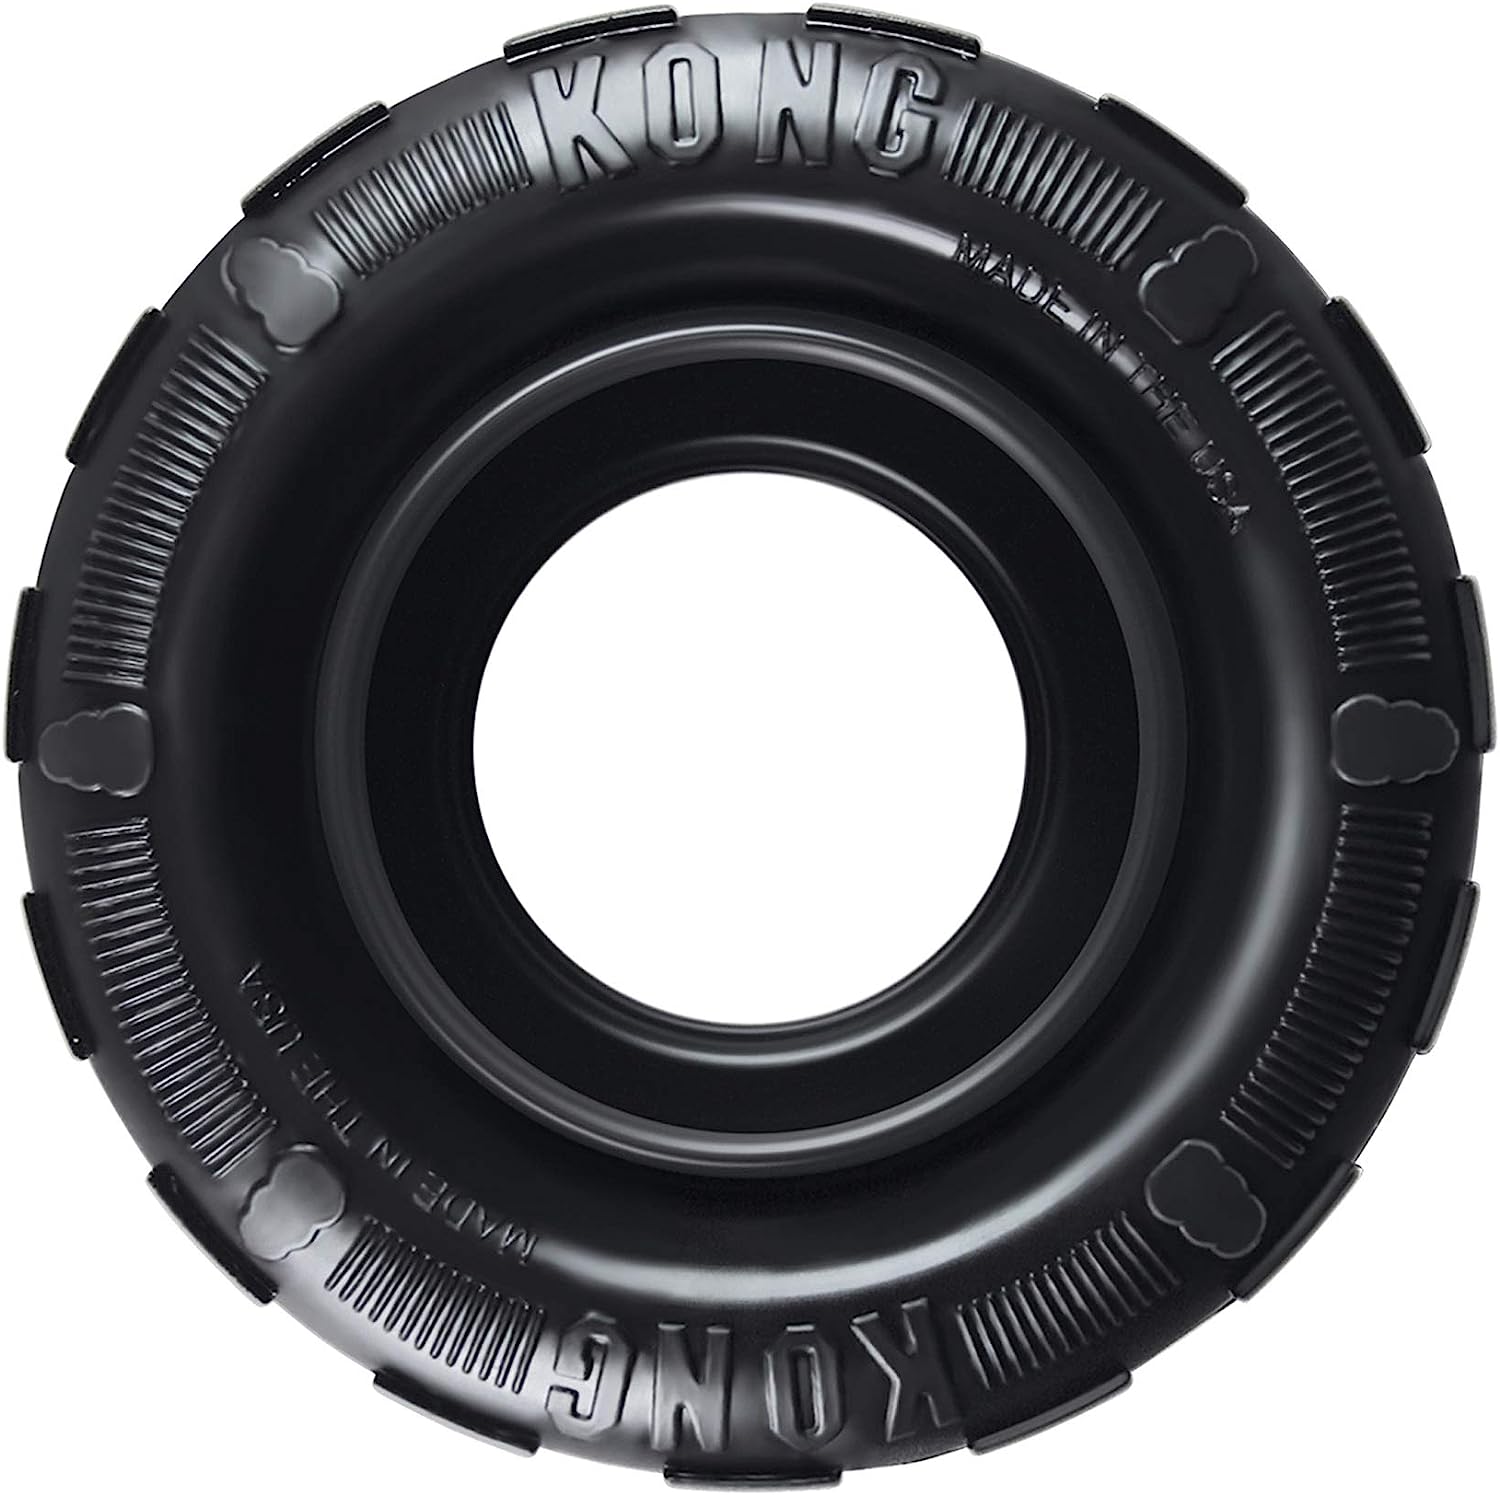 KONG Extreme Tire Dog Toy